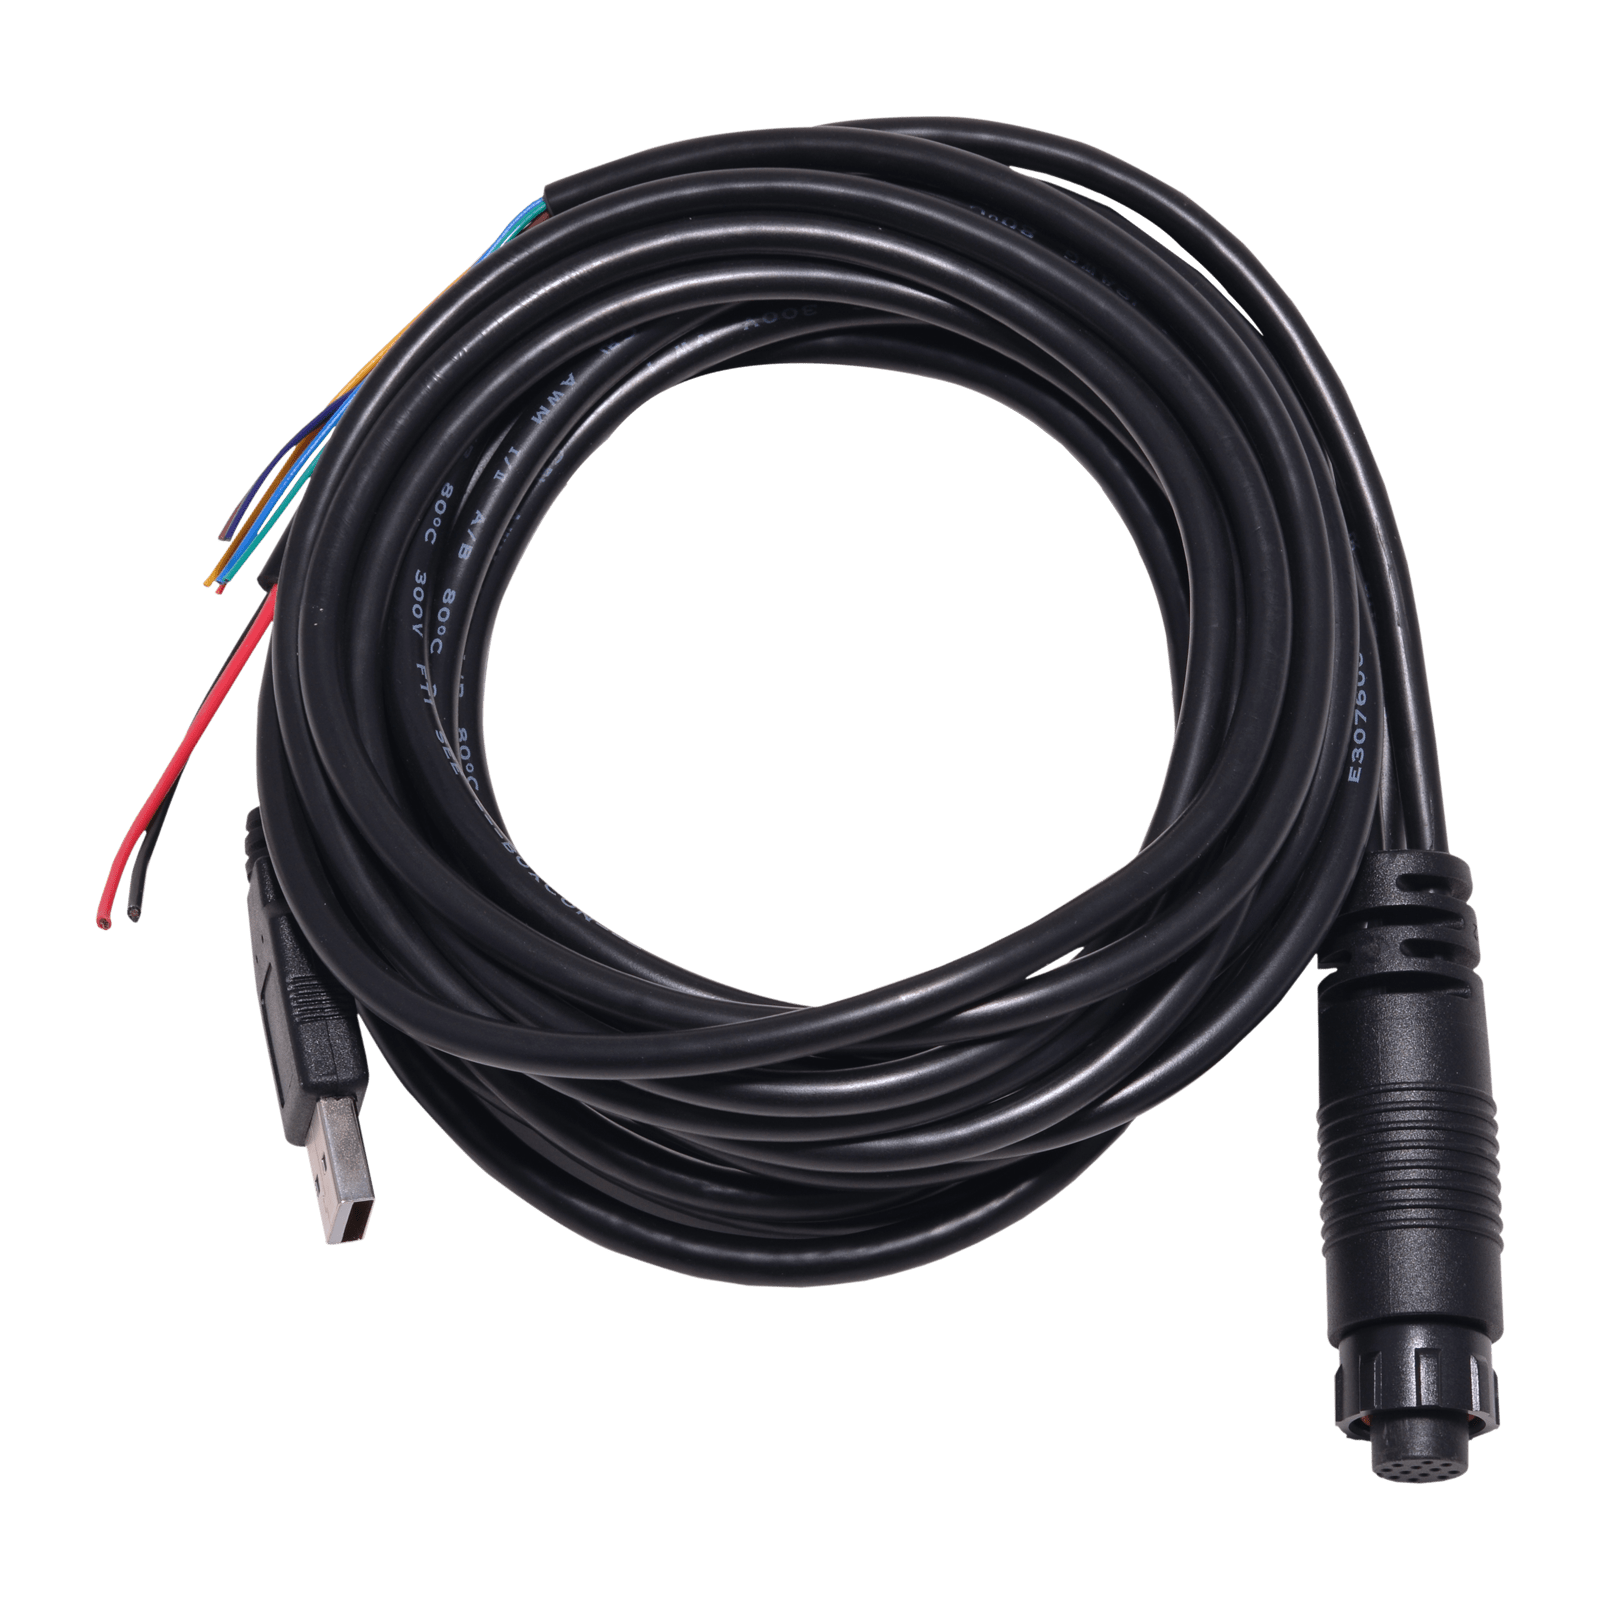 POWER / DATA CABLE